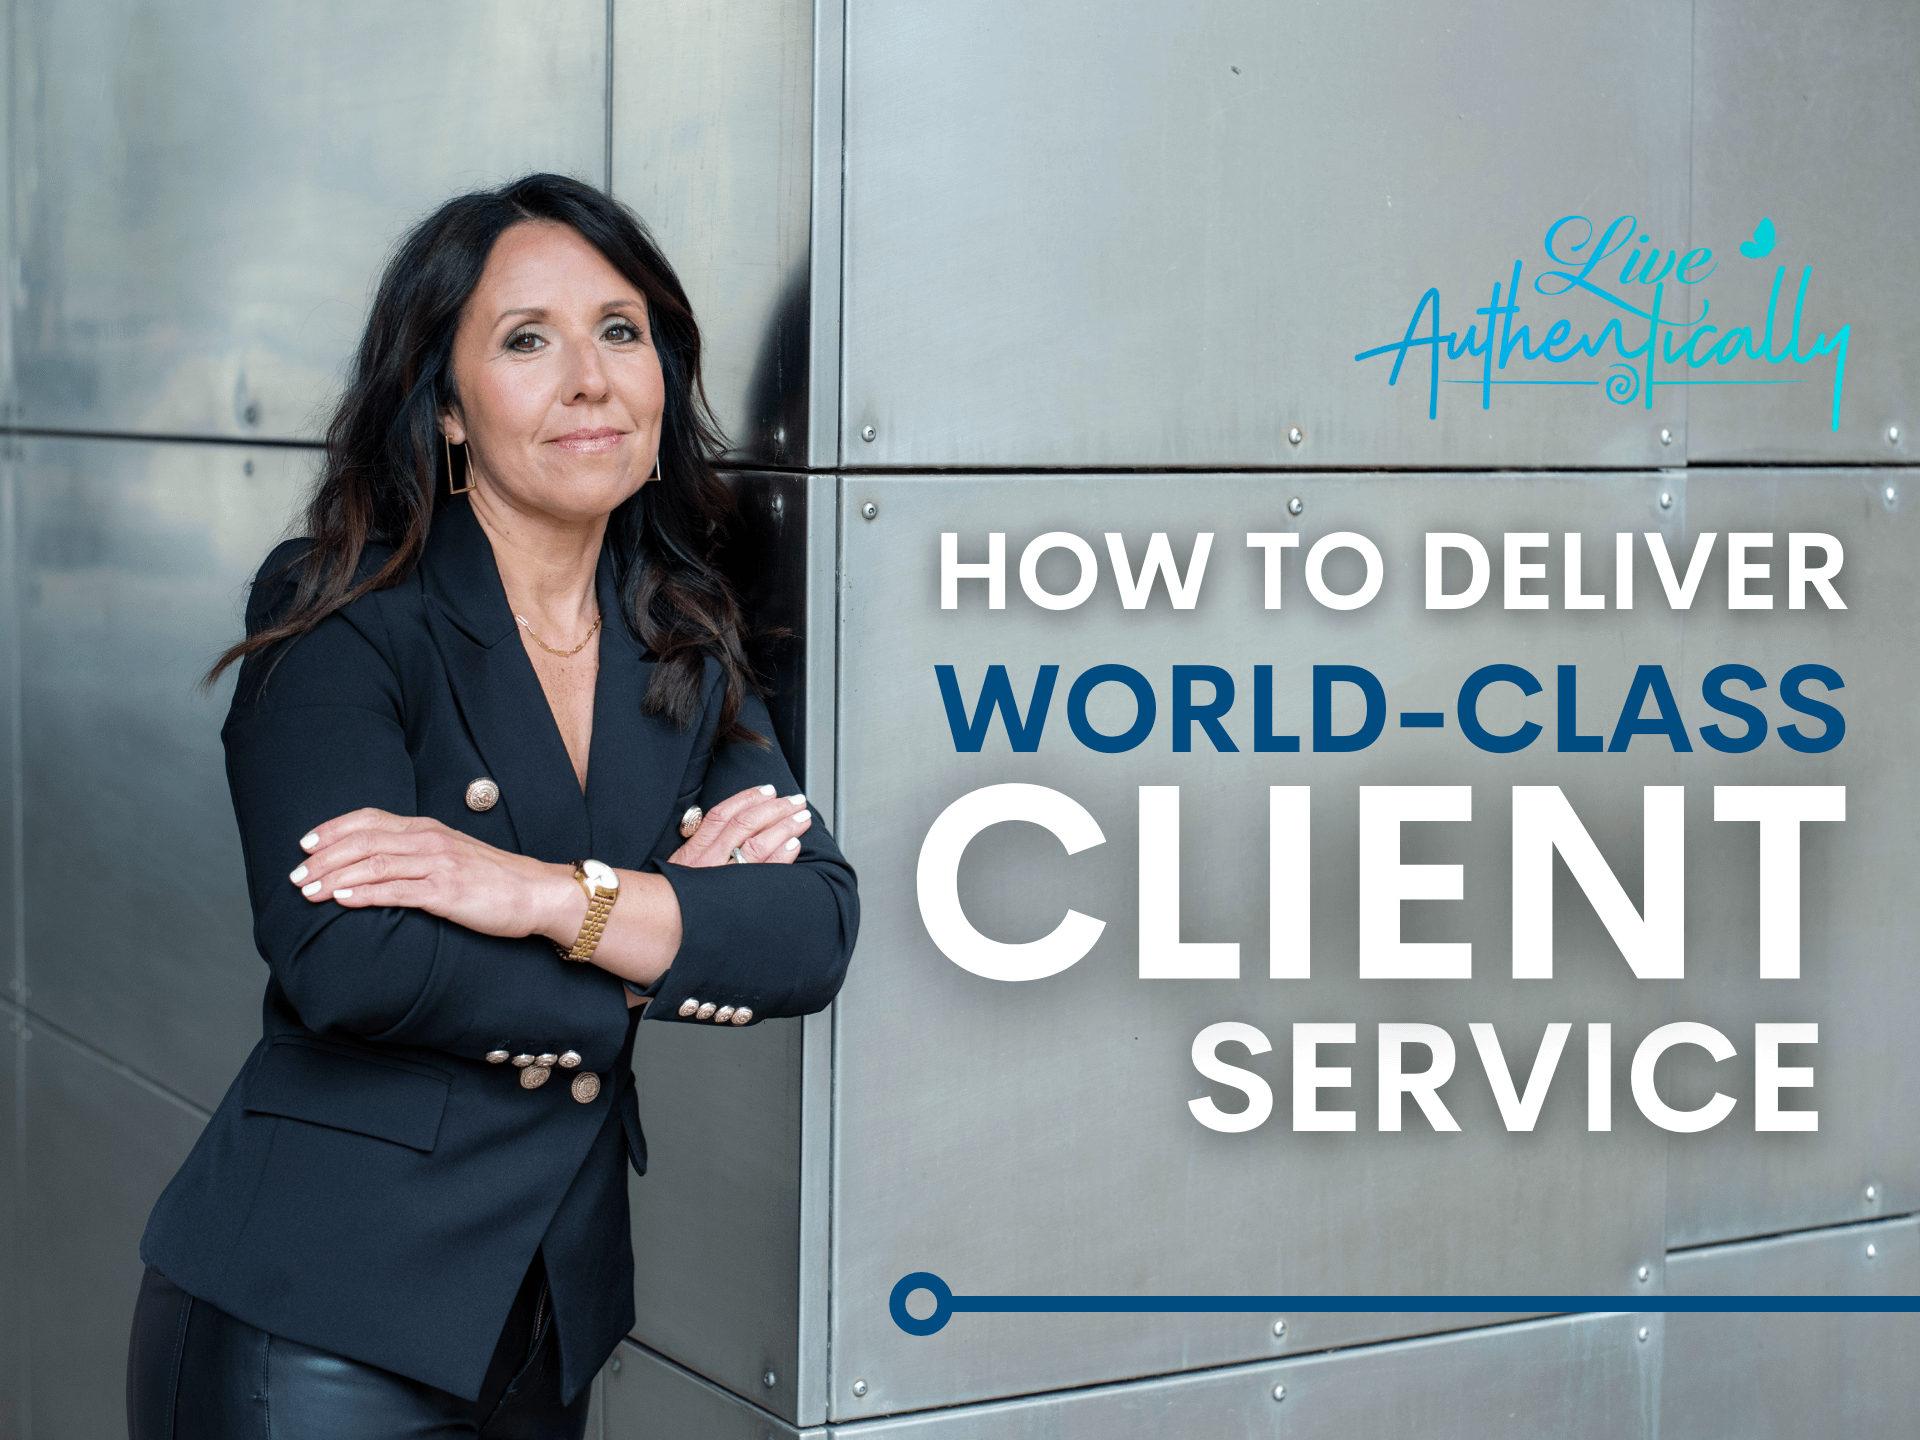 How to Deliver World-Class Client Service